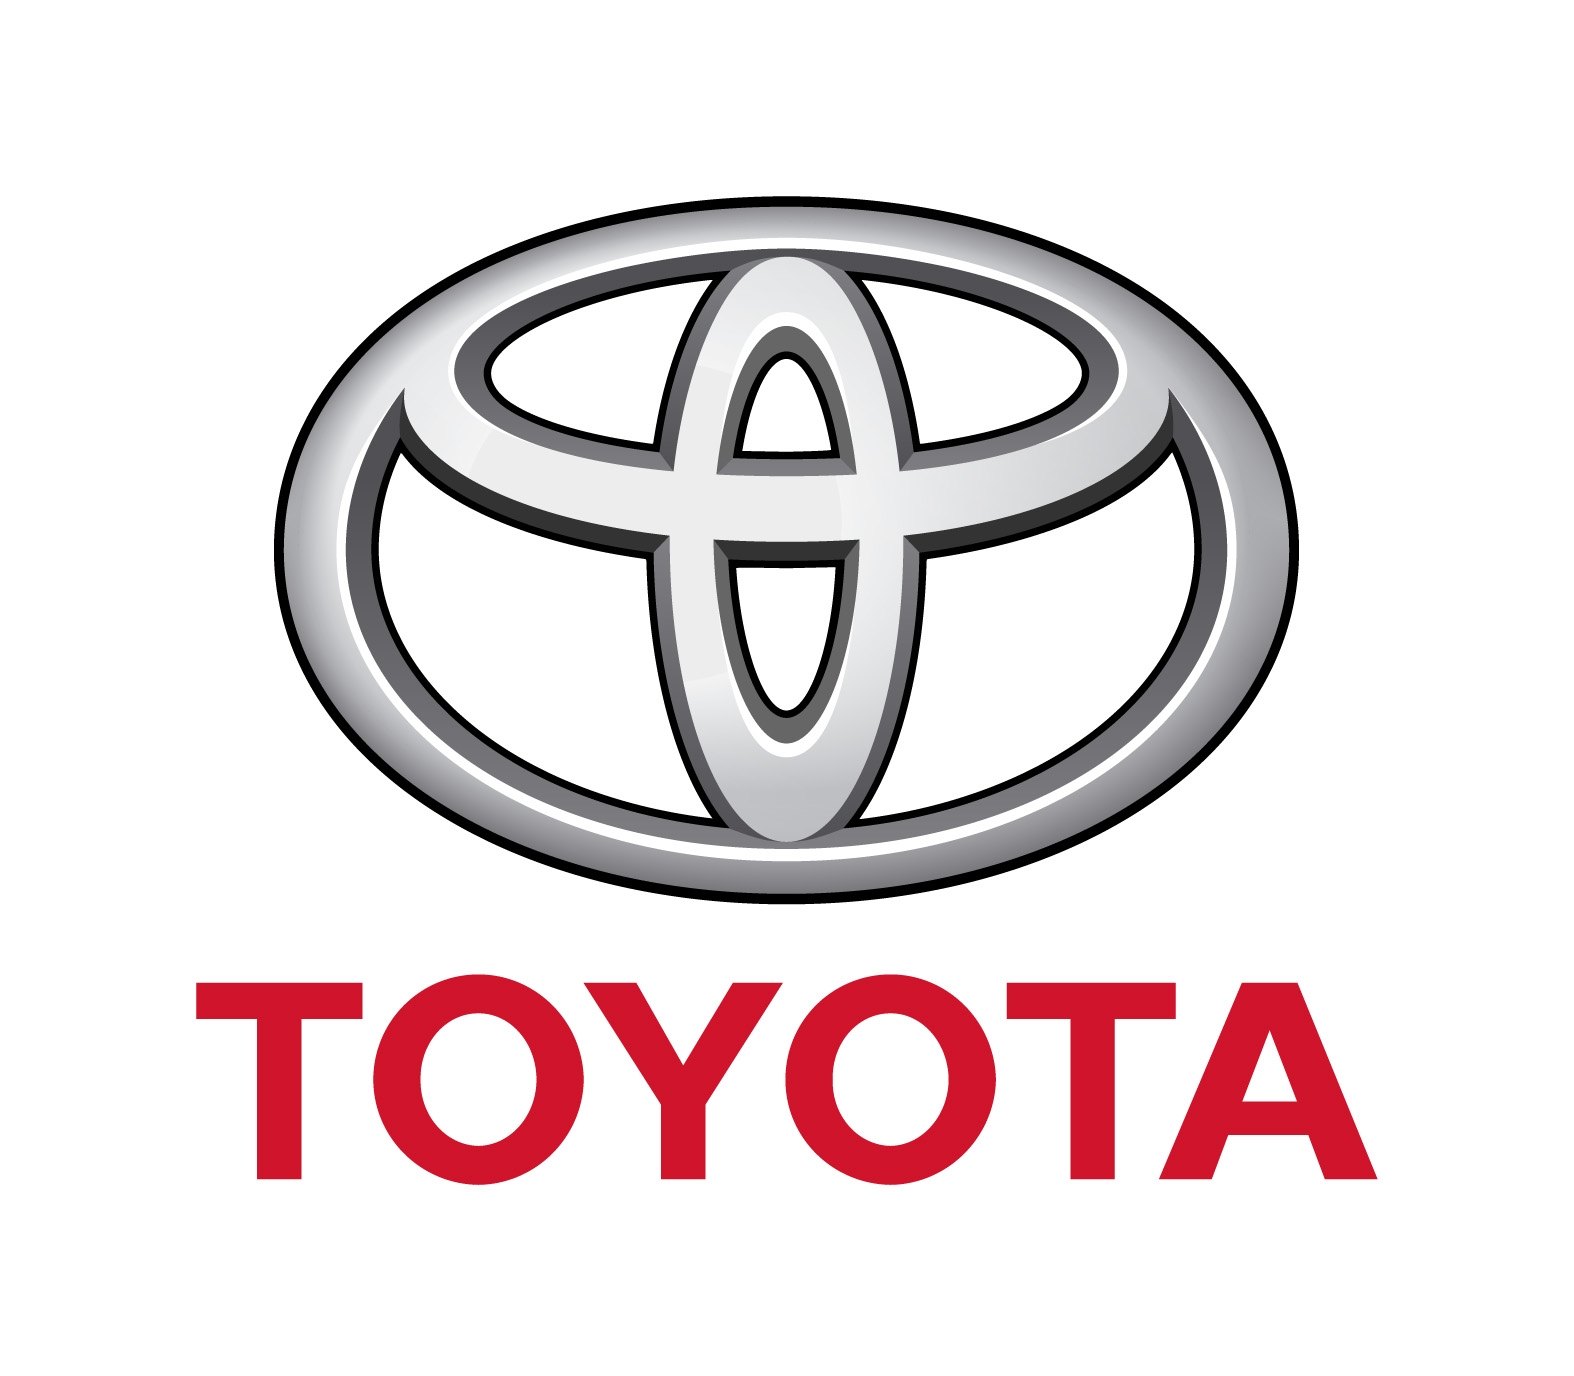 the meaning of toyota logo #2